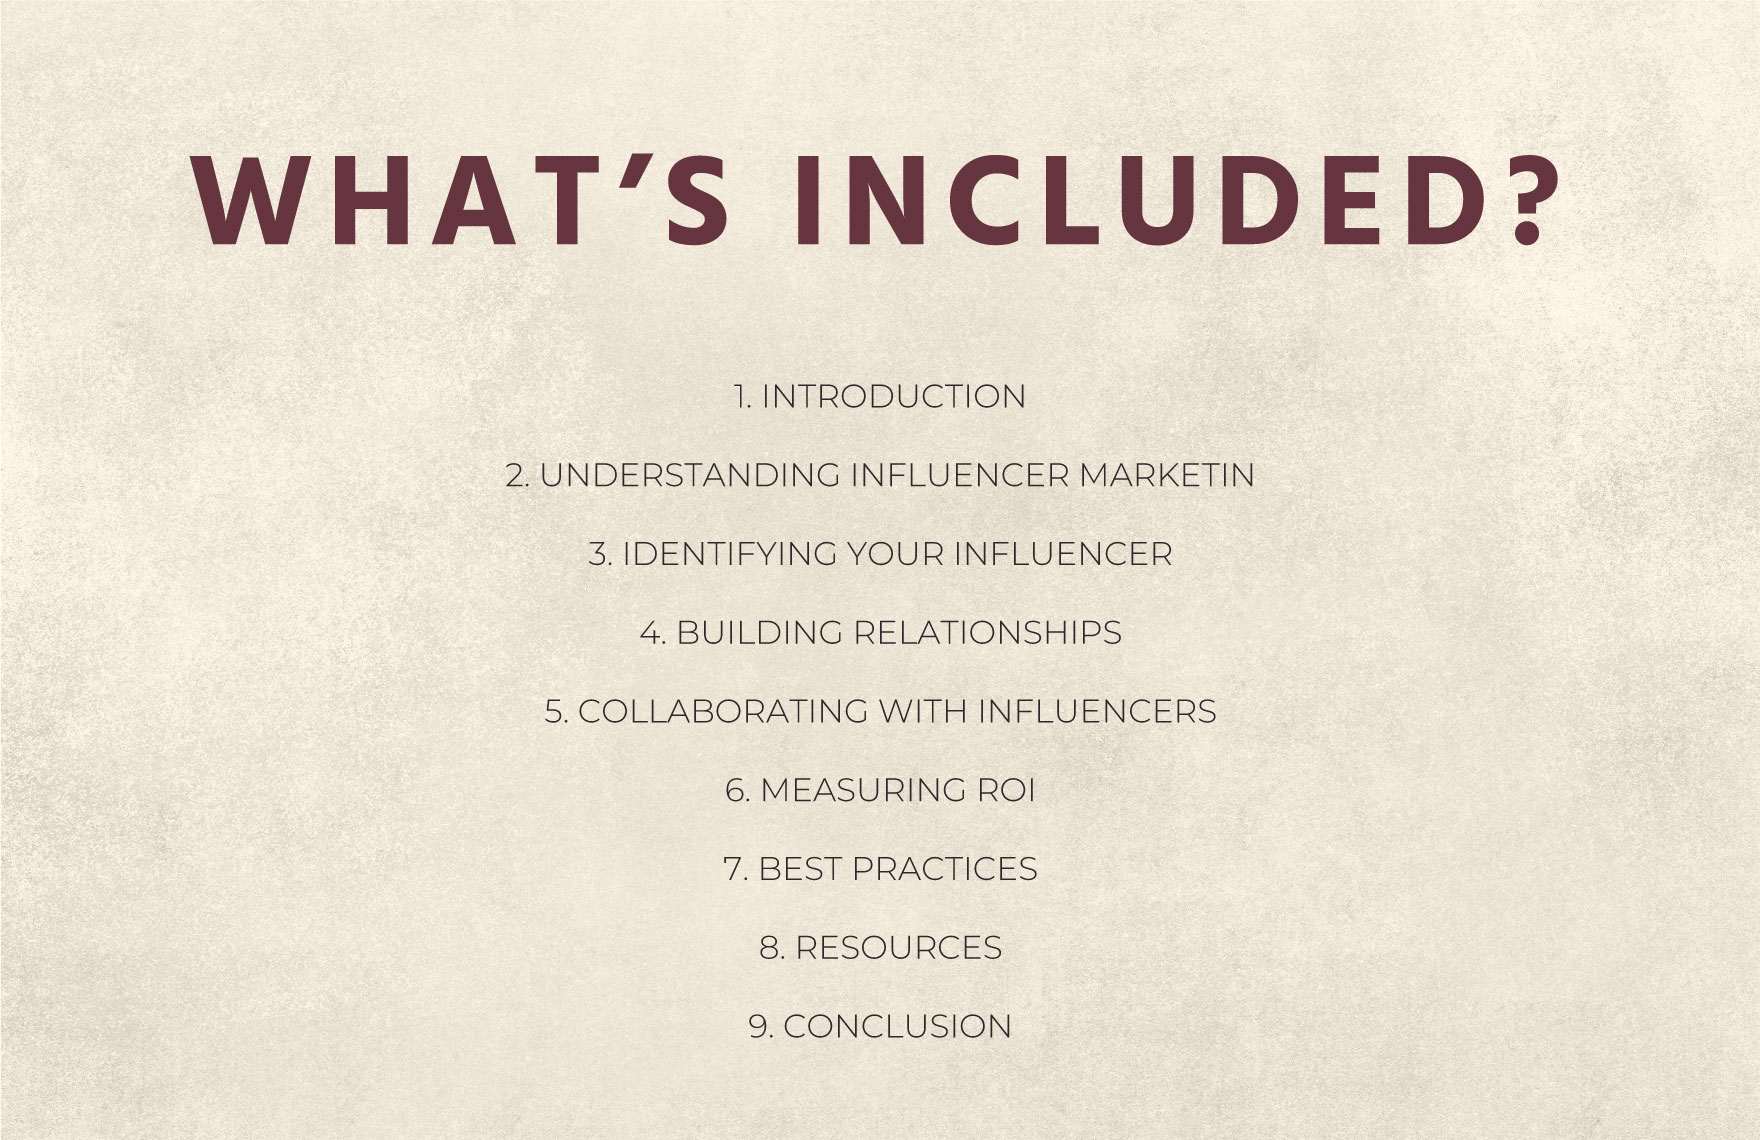 Social Media Marketing Influencer Outreach Training Manual Template in